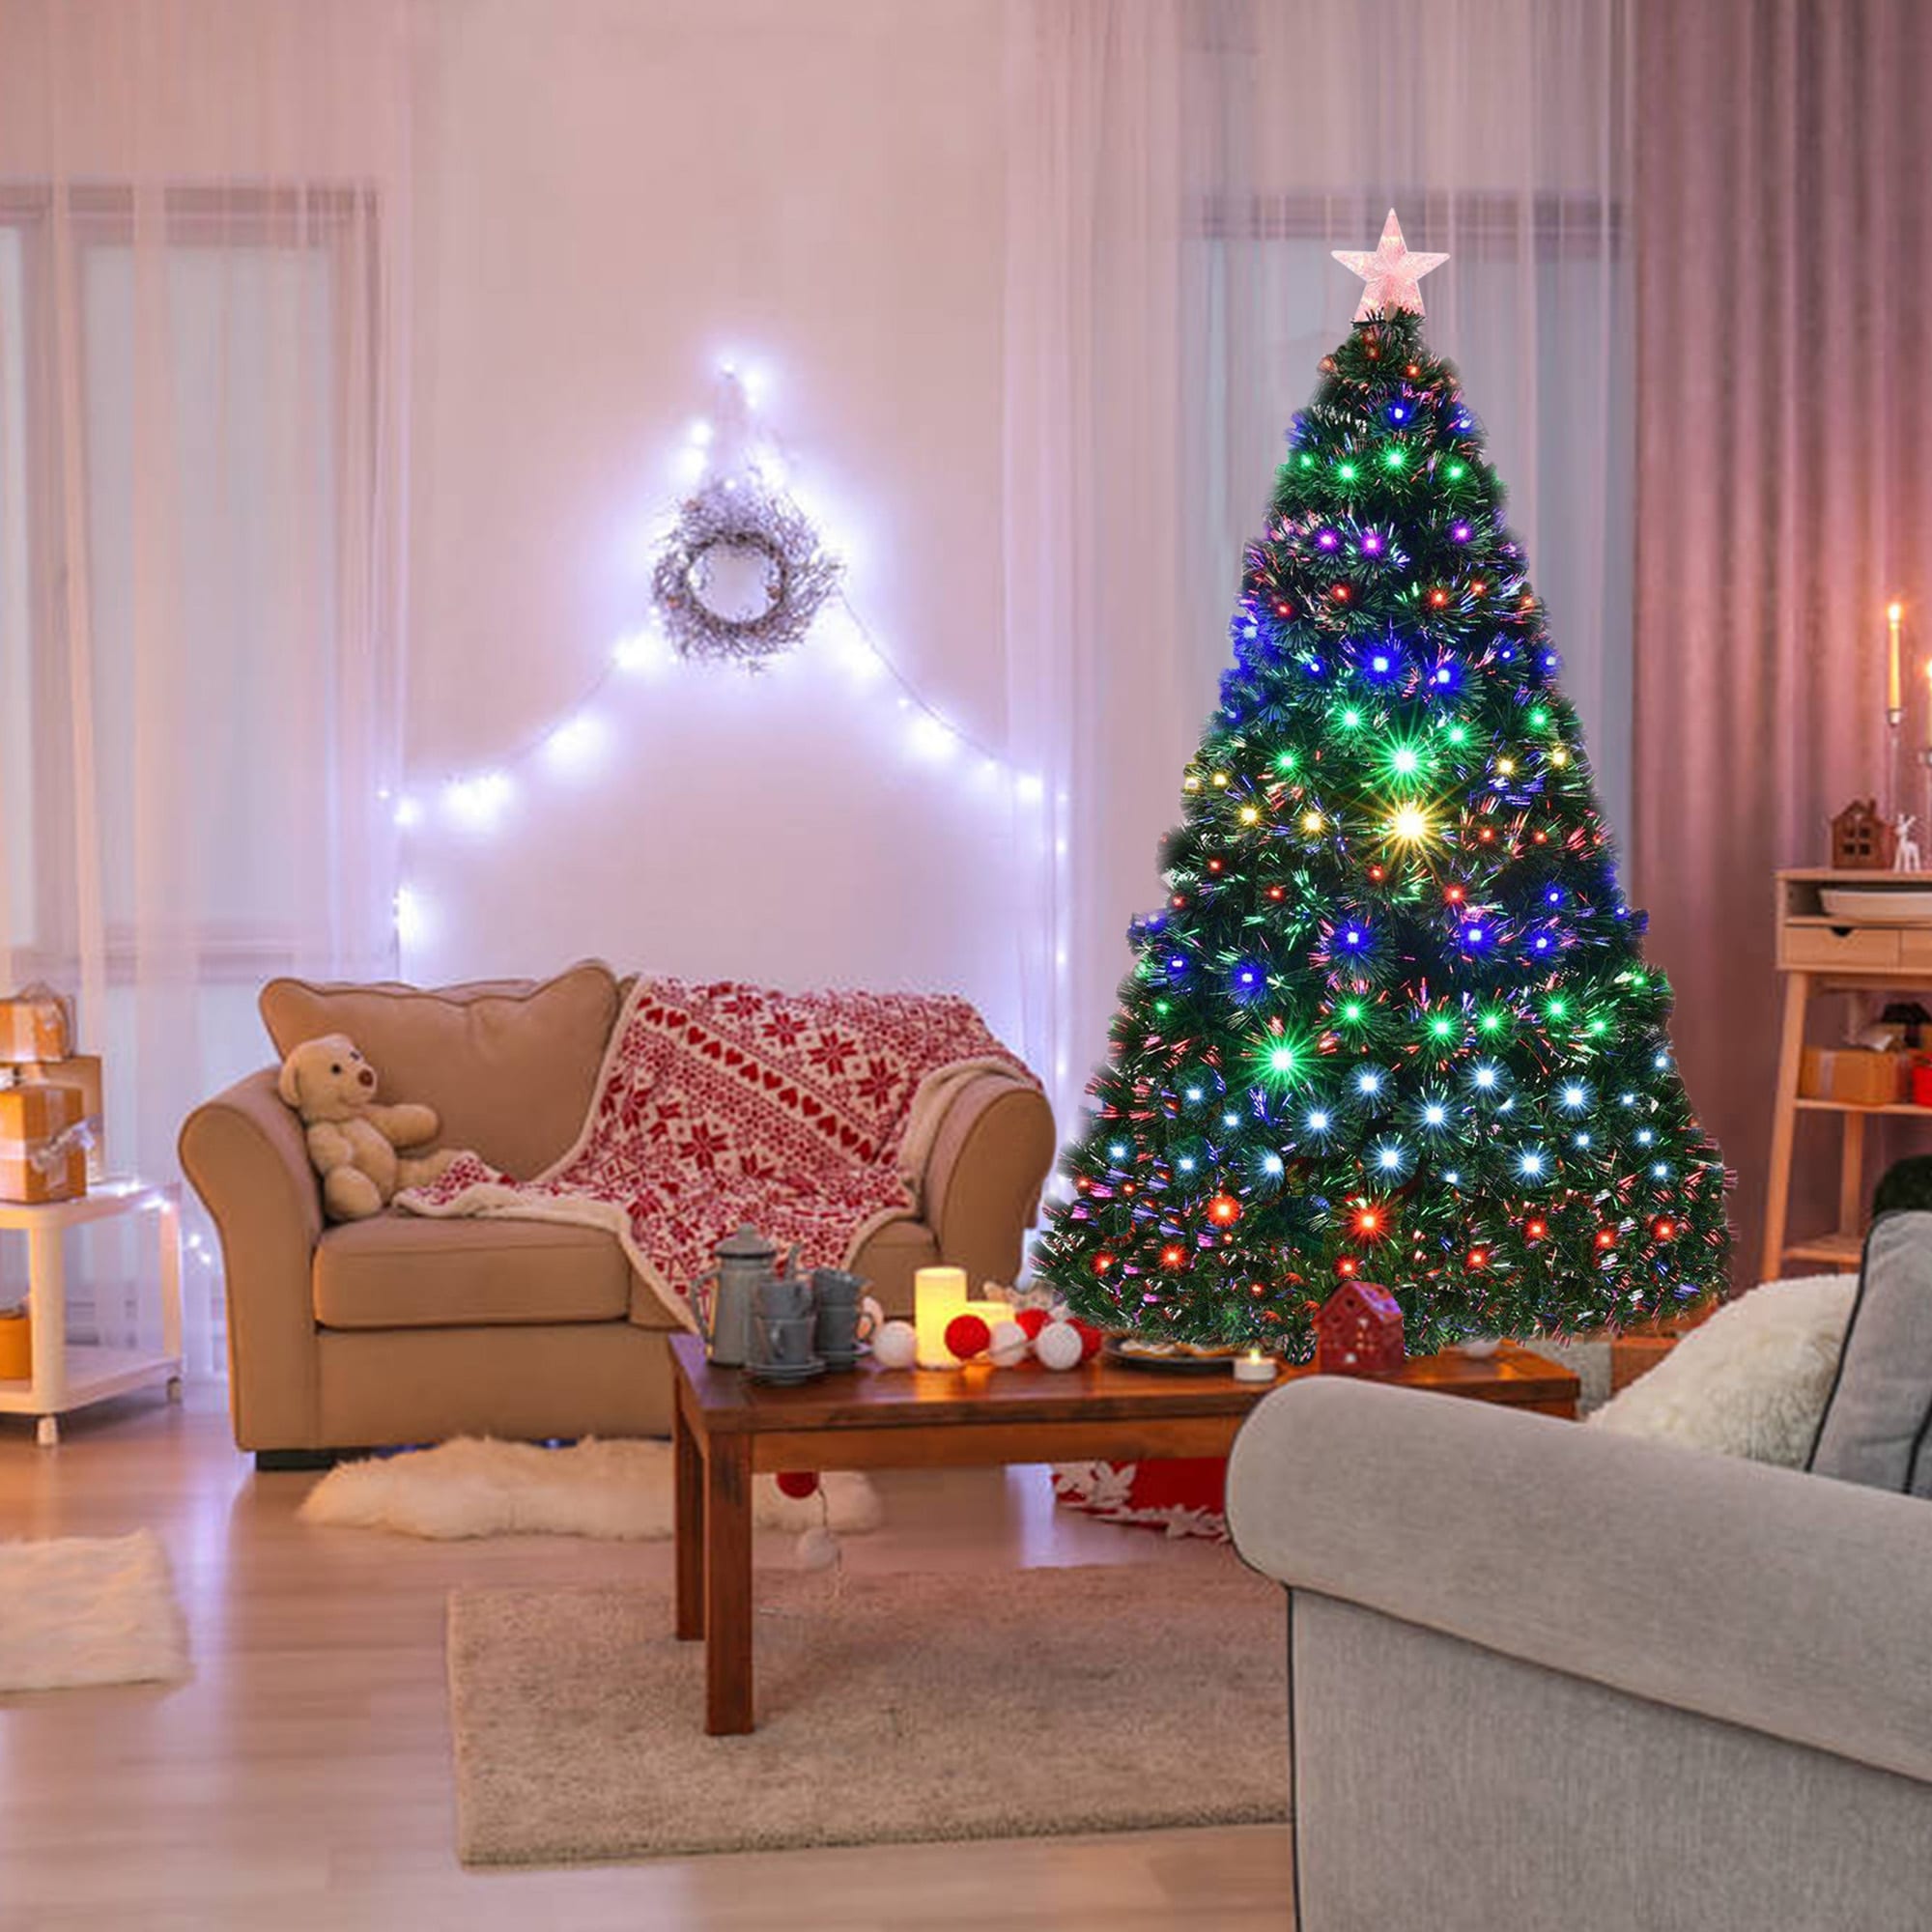 Fortumia 6' Christmas Tree with LED Lights and Remote Control